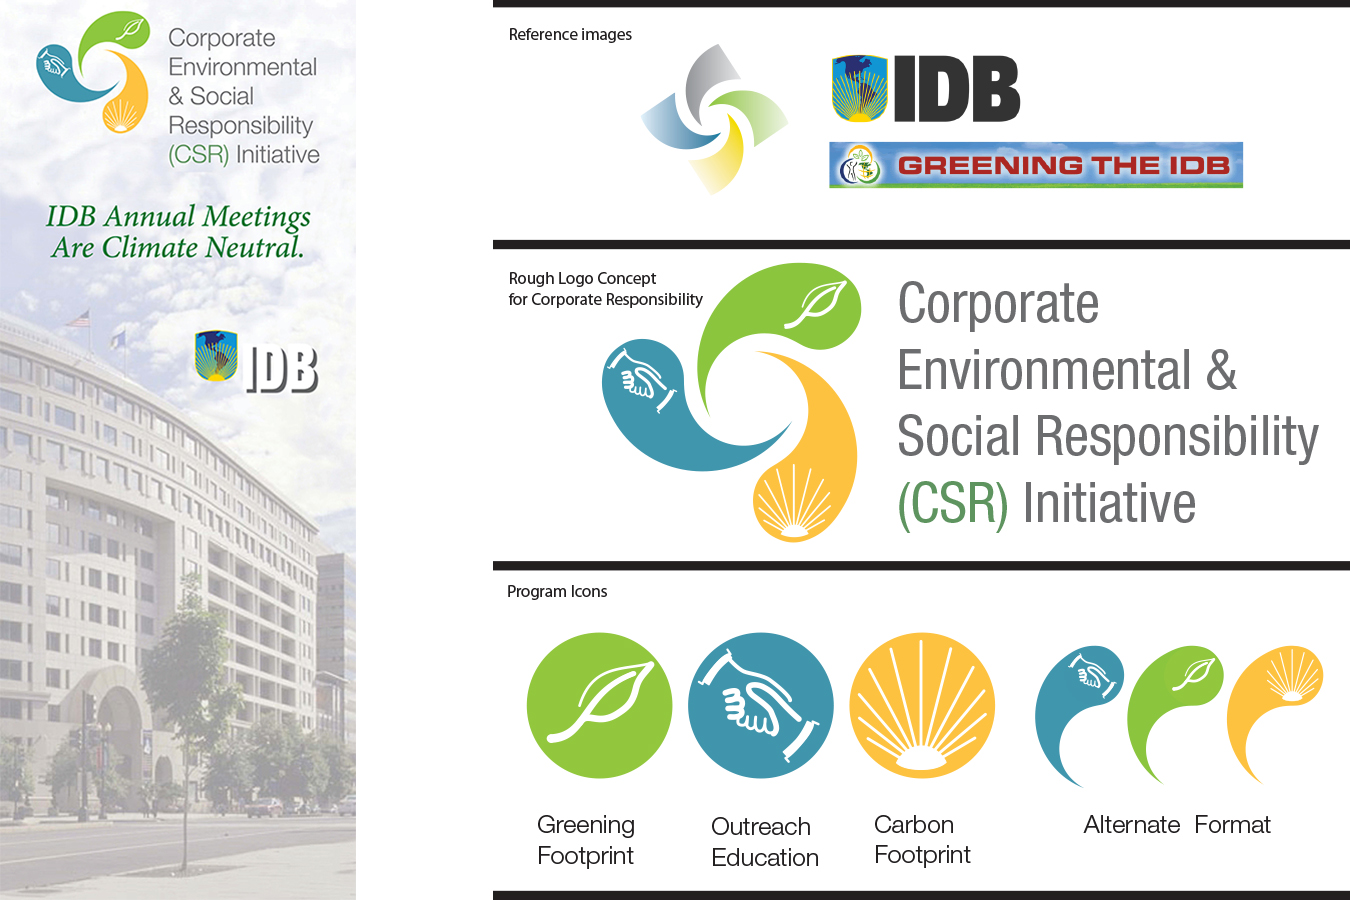 IDB Corp Sustain : Corporate sustainability icon and banner for Inter-American Development Bank